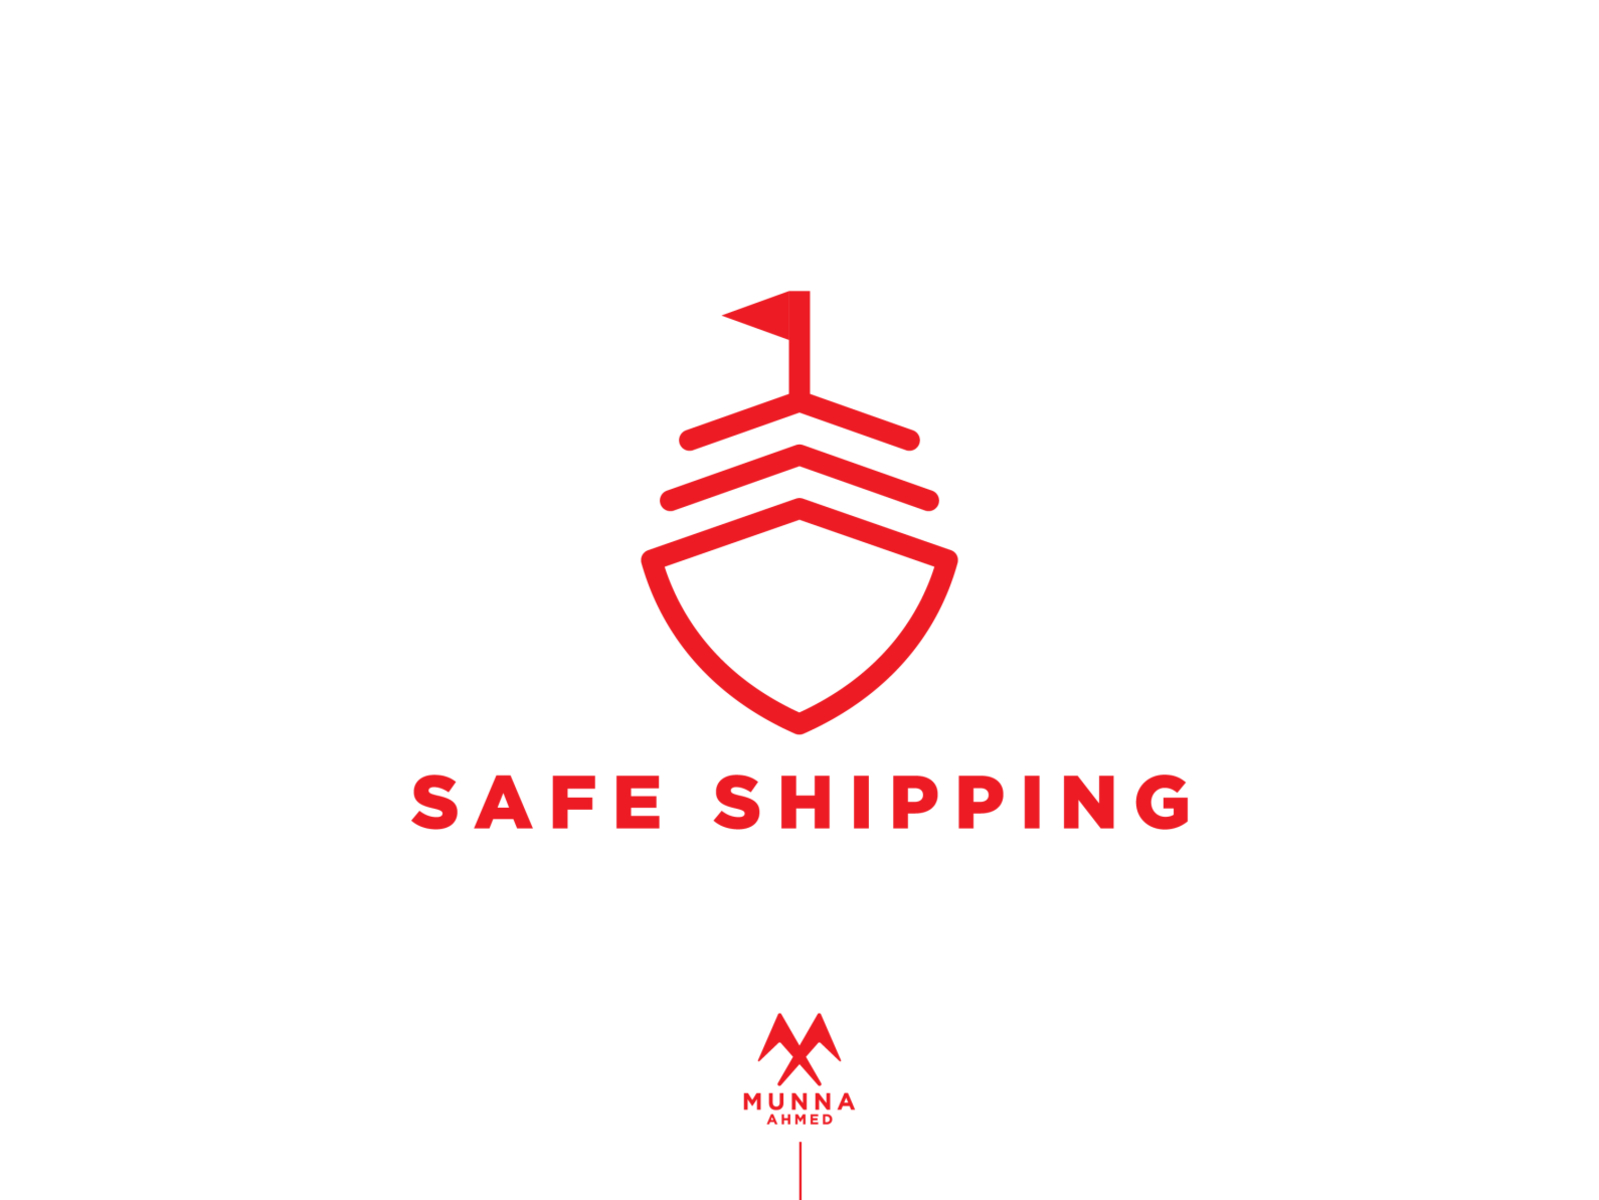 Transport and Logistics Maritime Shipping Company Logo Template in  Illustrator, Word, PSD - Download | Template.net